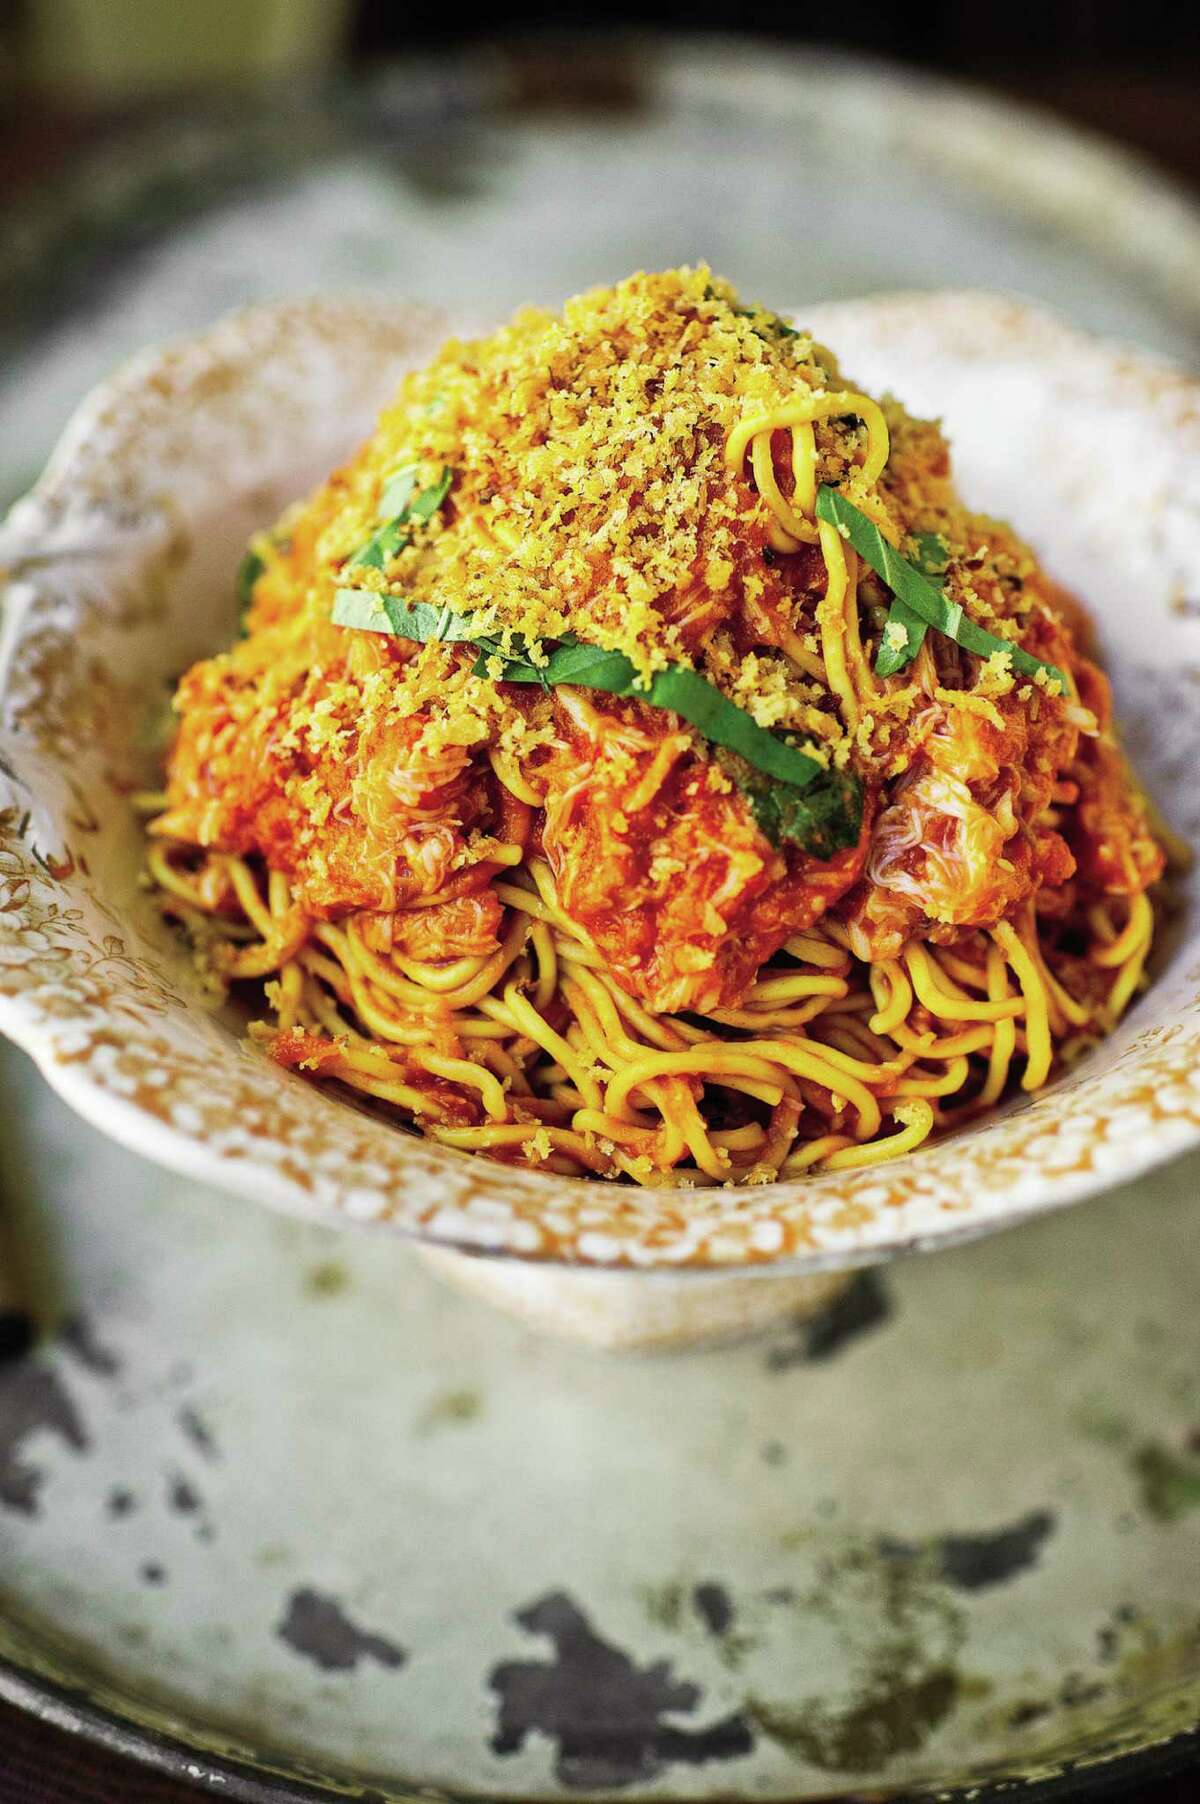 Spaghetti with Crab Fra Diavolo and Toasted Bread Crumbs from "Harold Dieterle's Kitchen Notebook" by Harld Dieterle (Grand Central Publishing).